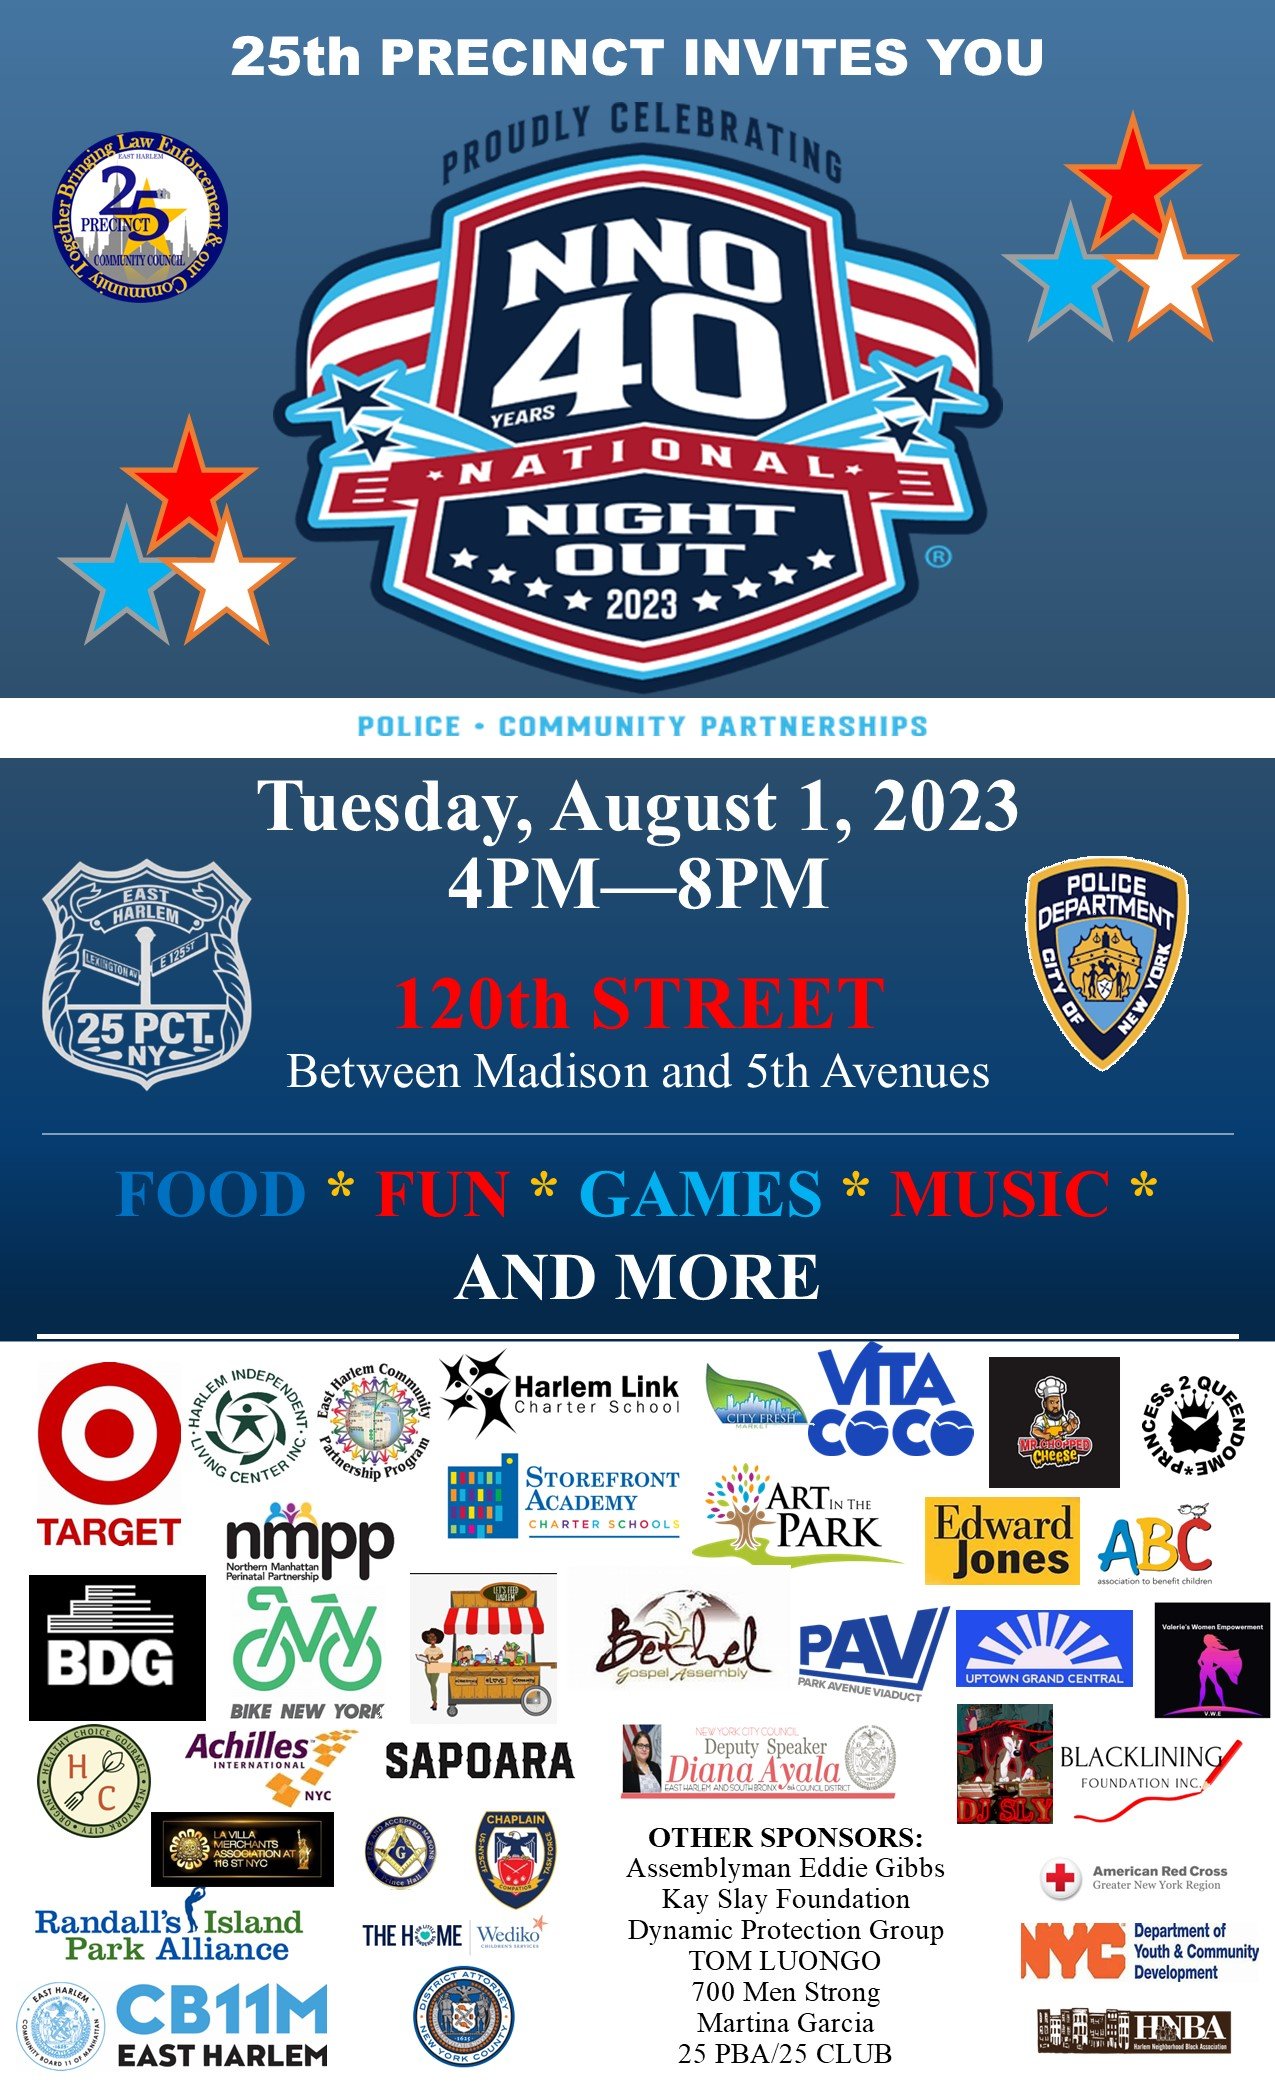 National Night Out is Coming